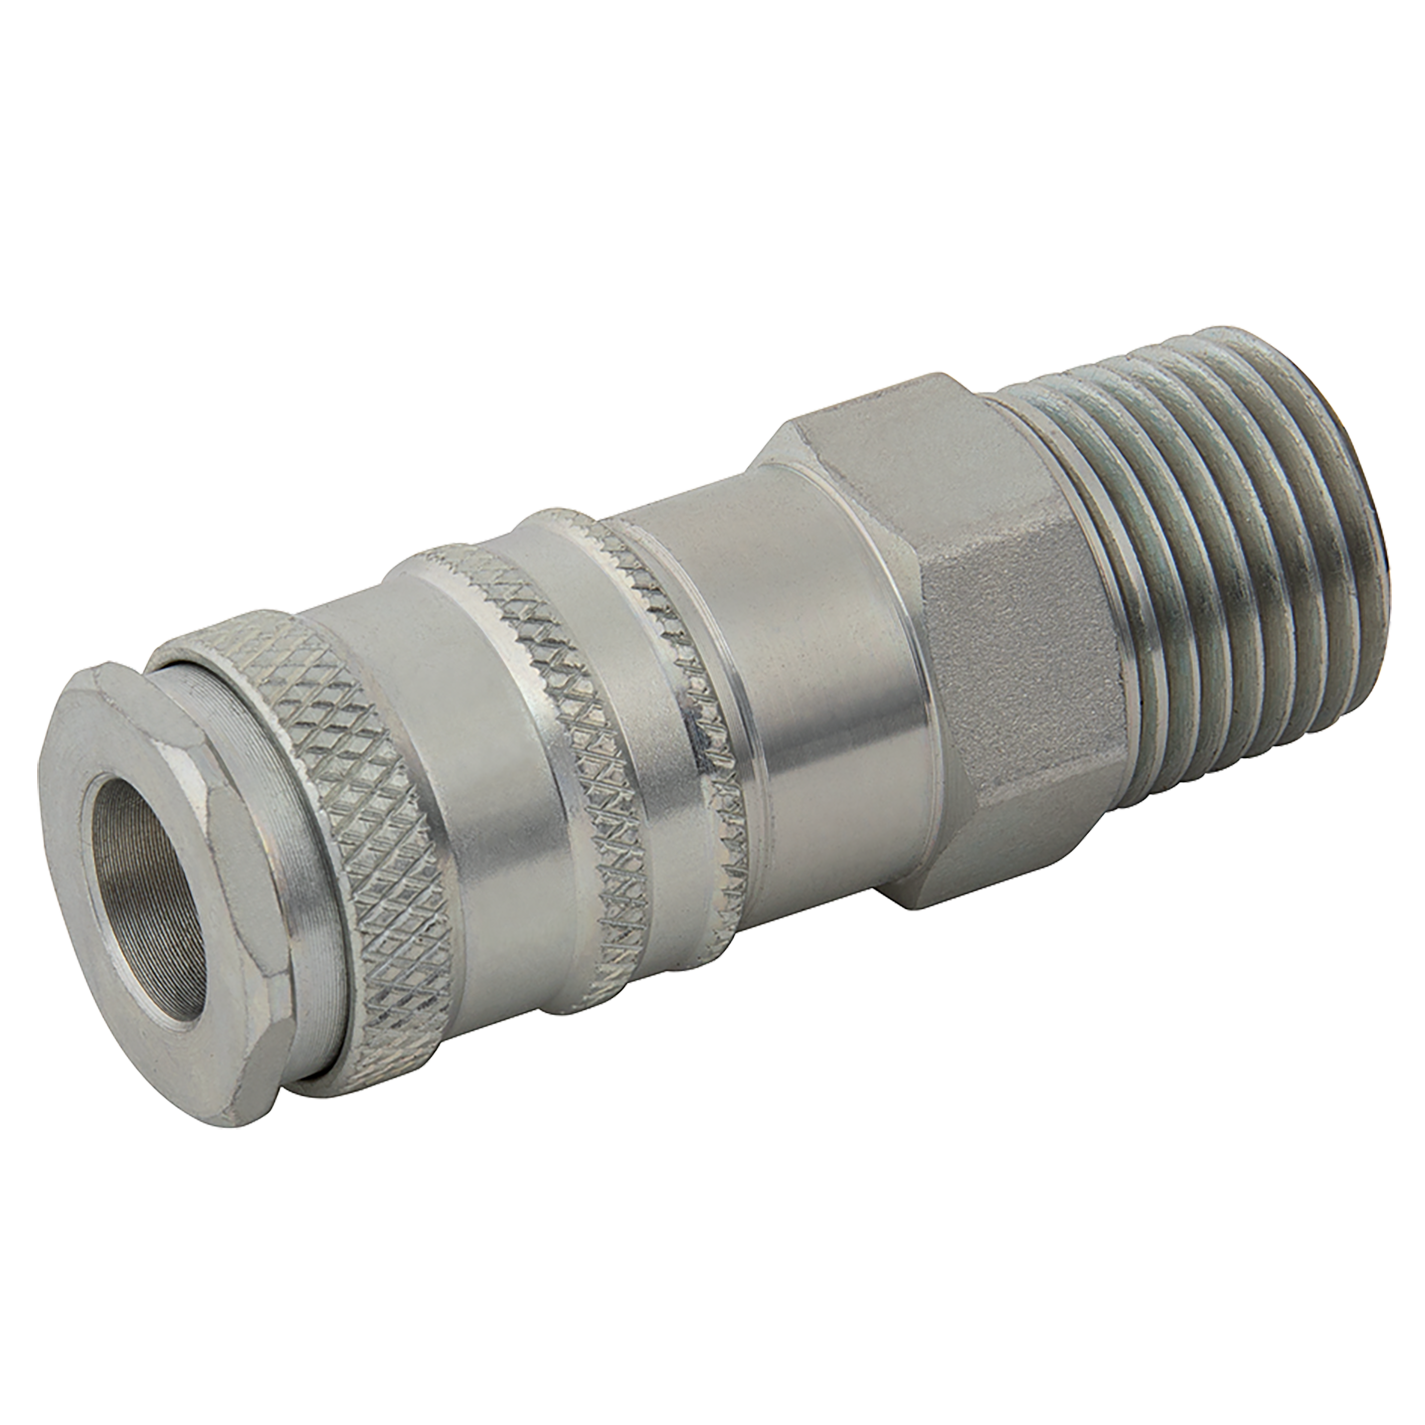 BE-23 ISO COUPLING 3/8 BSPT MALE